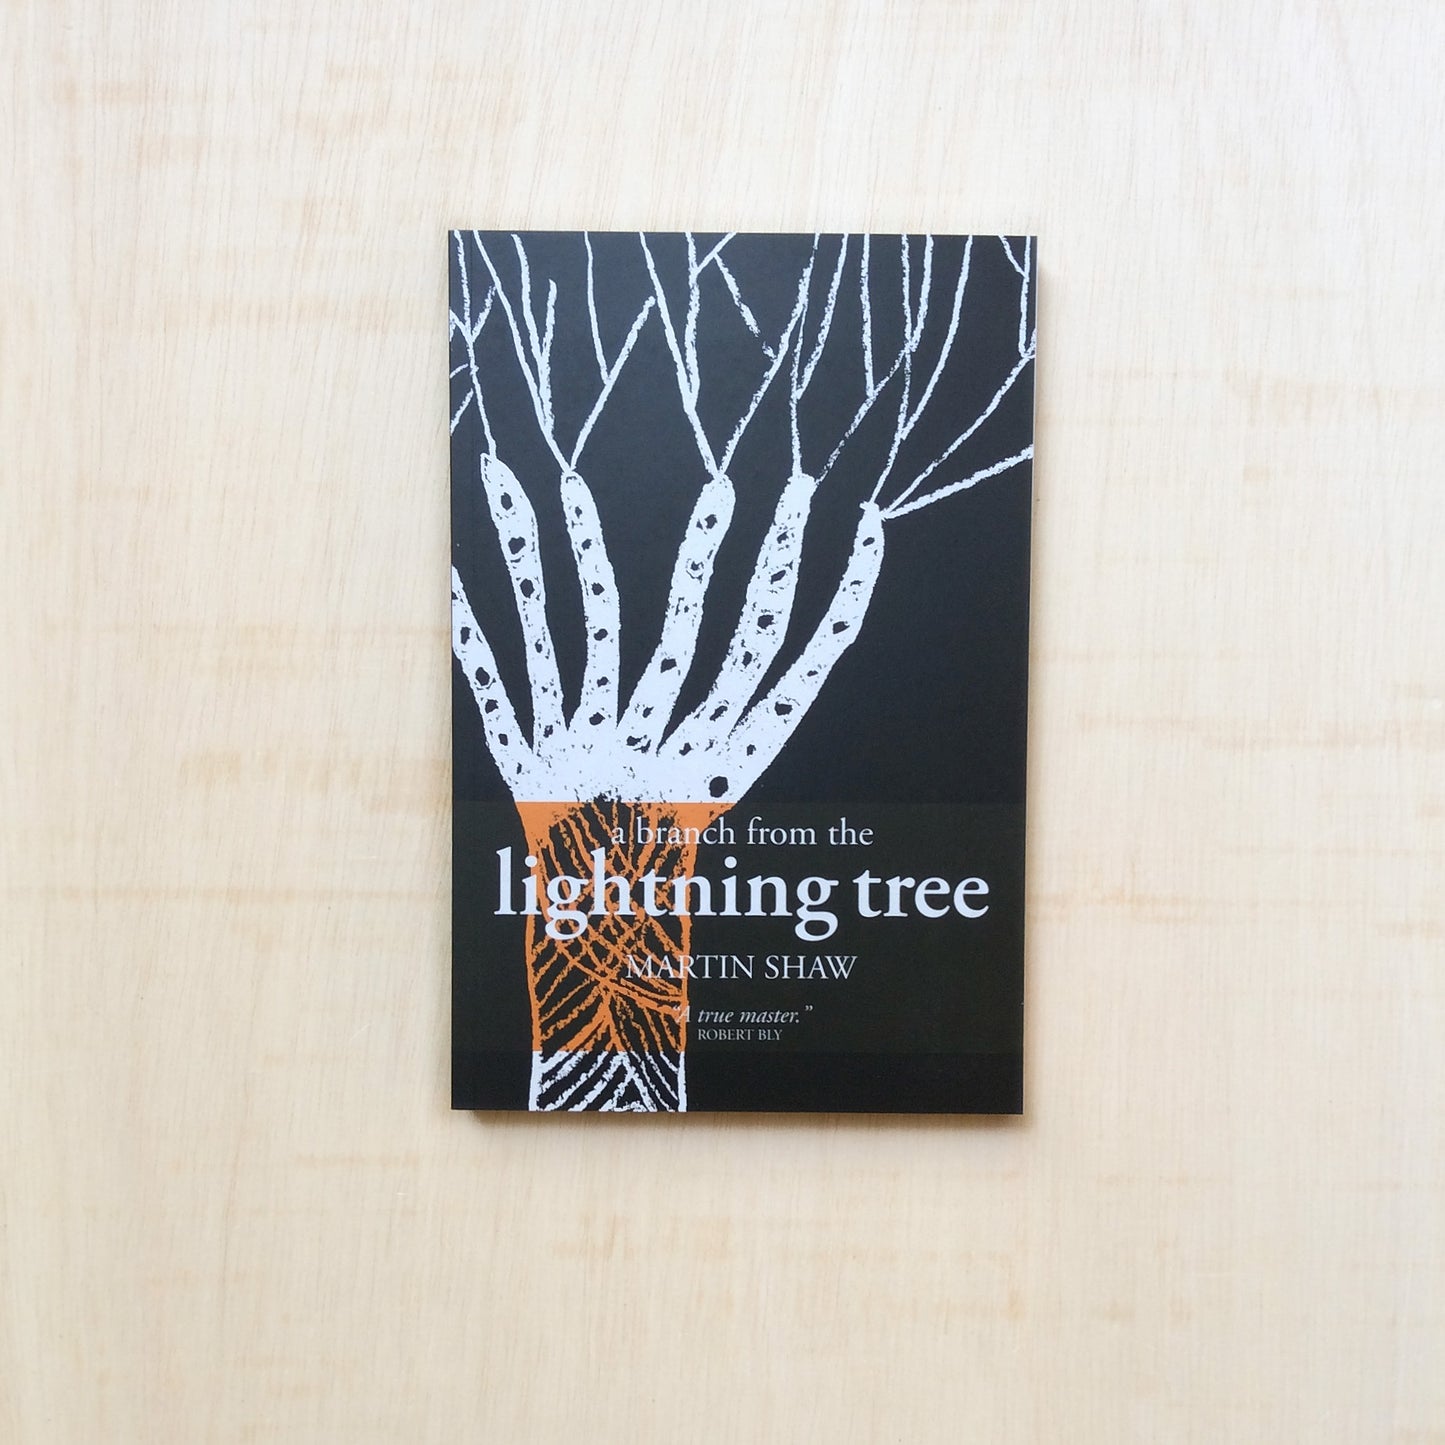 A Branch from the Lightning Tree